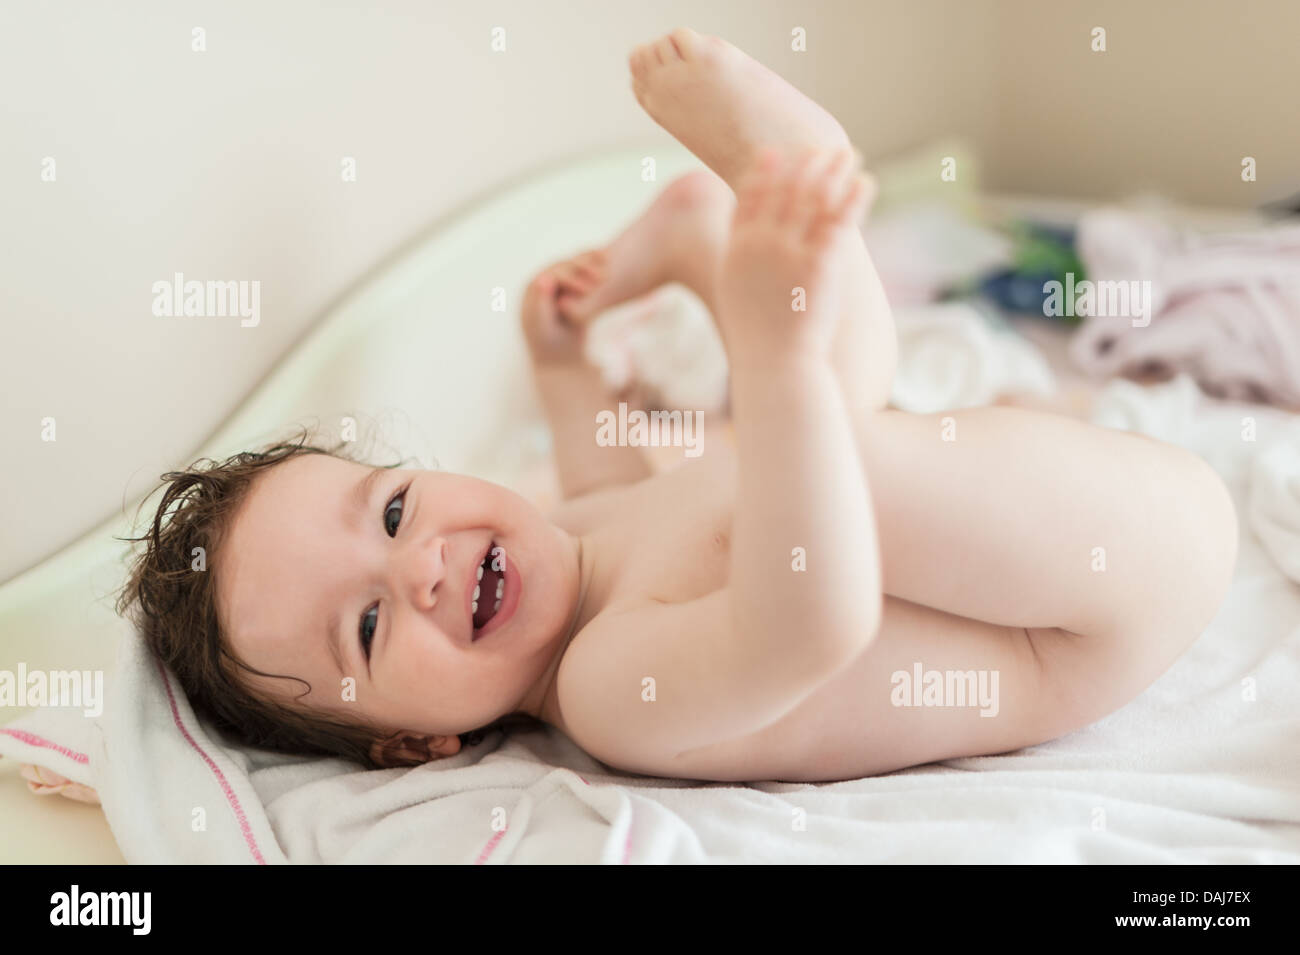 Naked girls babys Cute Nude Baby Girl Lying Down After Shower Stock Photo Alamy